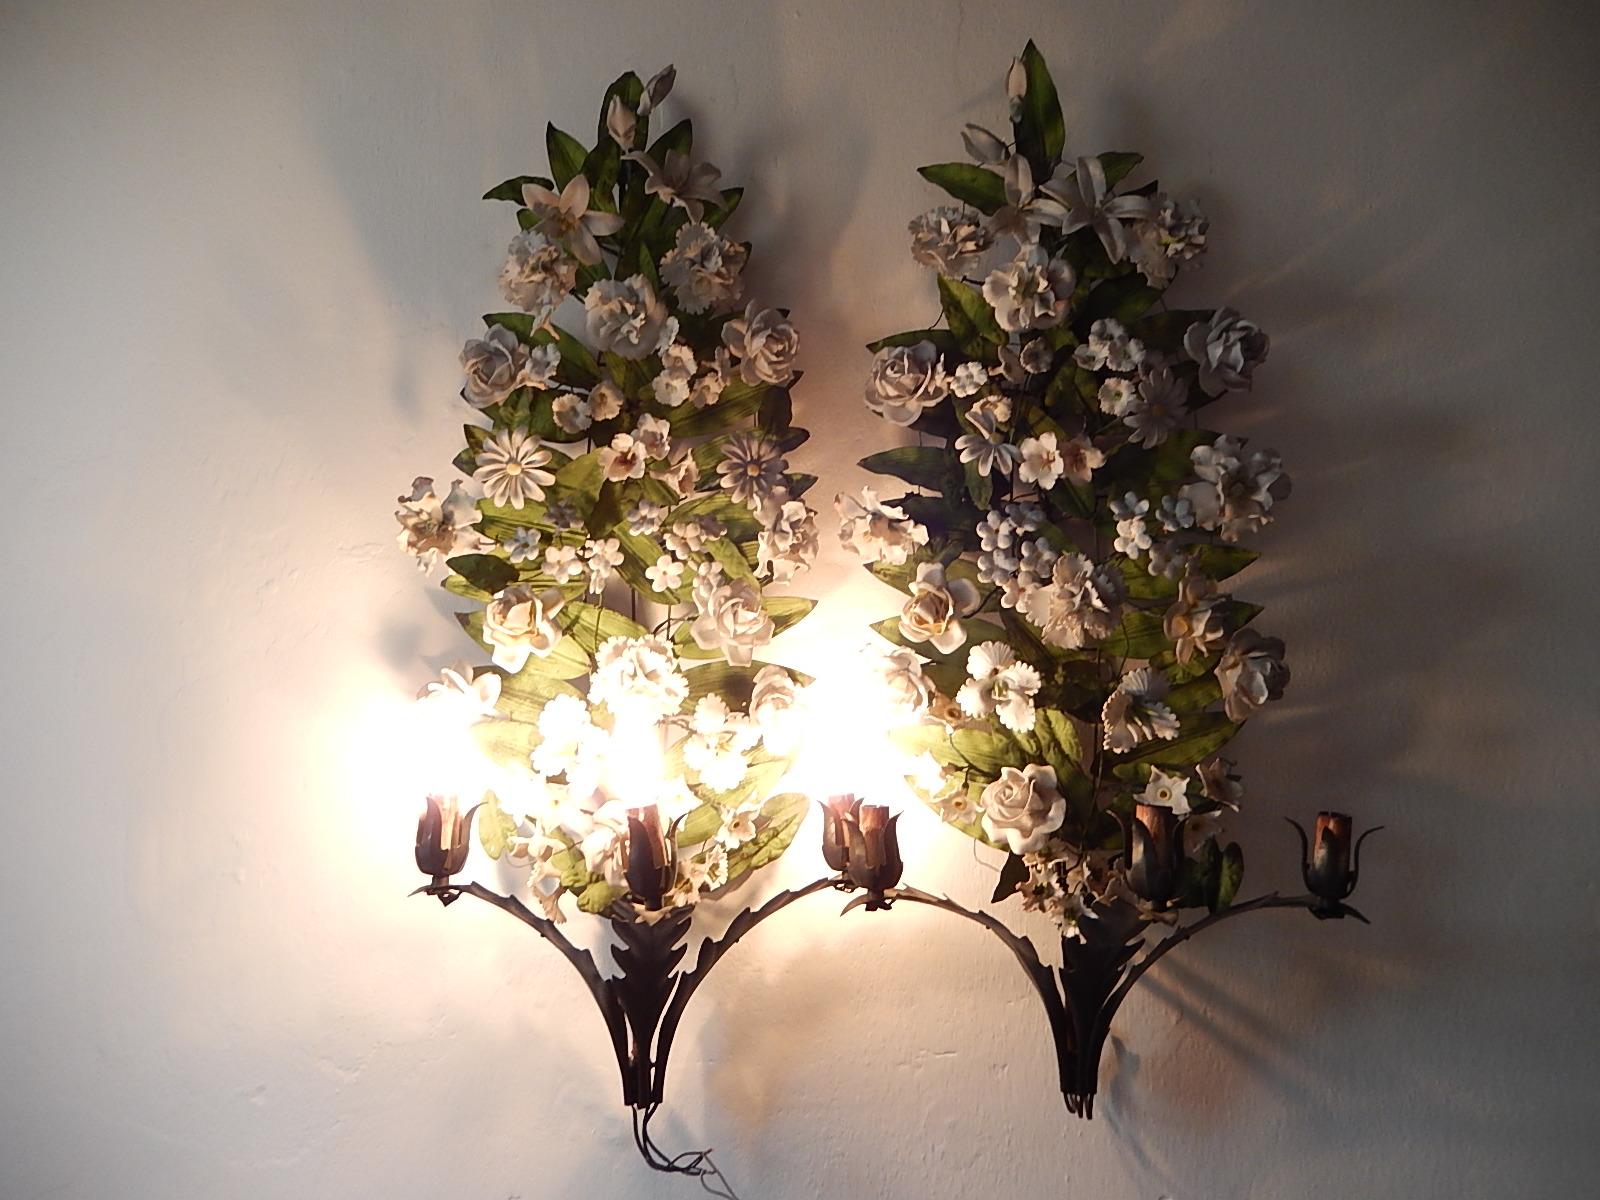 Extremely rare sconces. Housing 3 lights each. Original color on tole leaves. Adorning huge handmade flowers in bisque porcelain. Some may have petals missing and flea bites. Re wired and ready to hang. Free priority shipping from Italy.